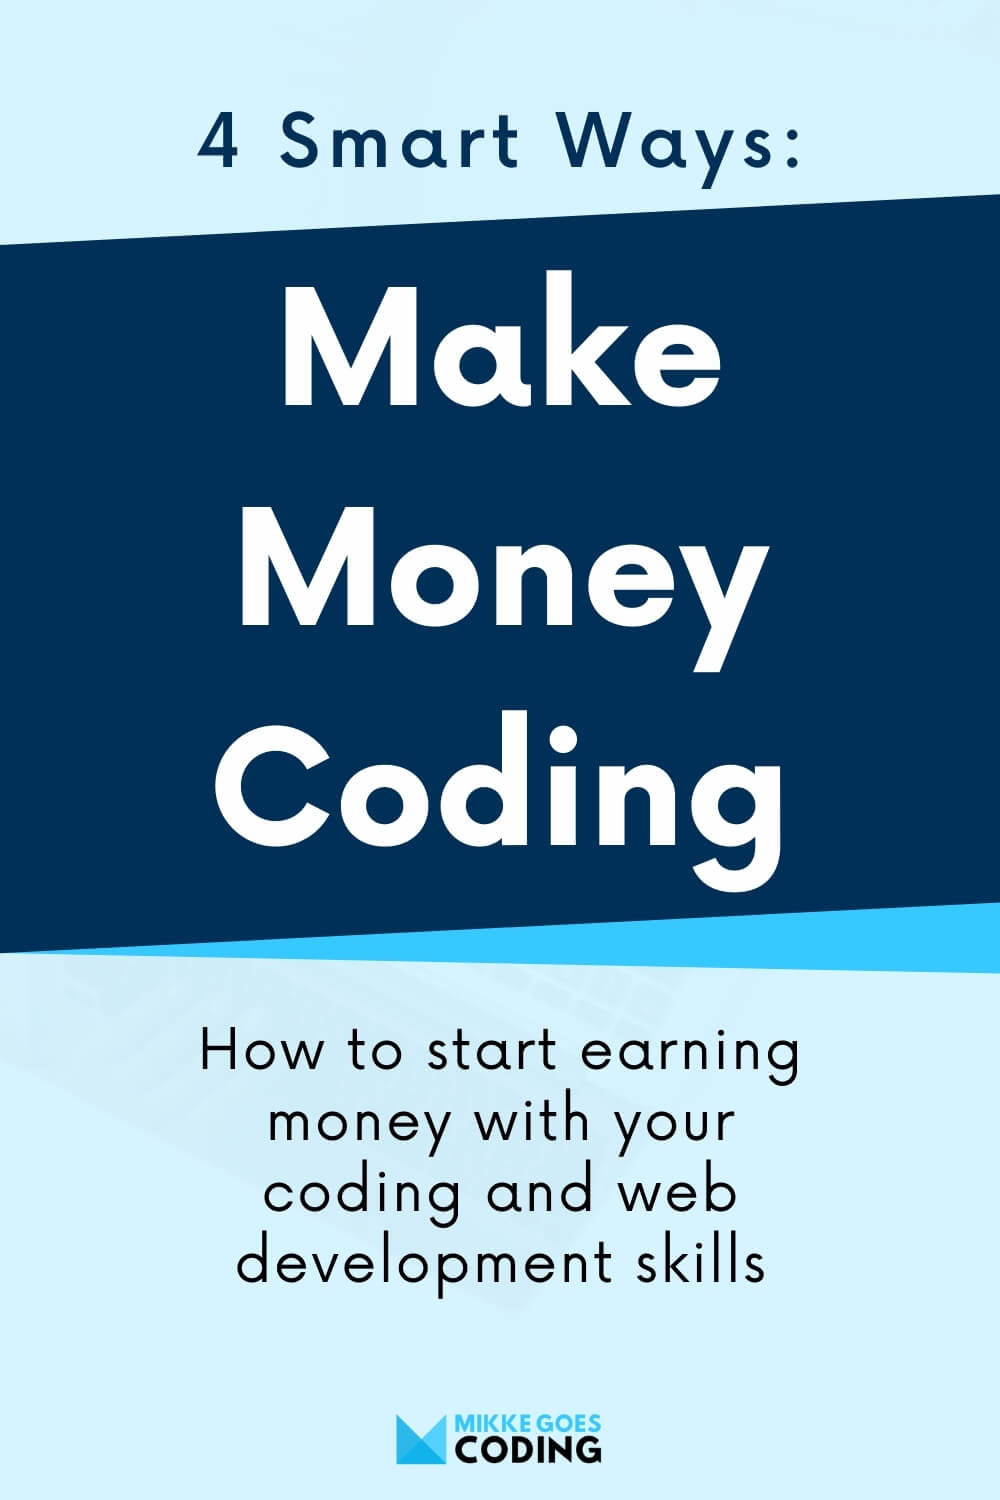 Make Money Coding: 4 Ways to Earn Income With Your Coding Skills